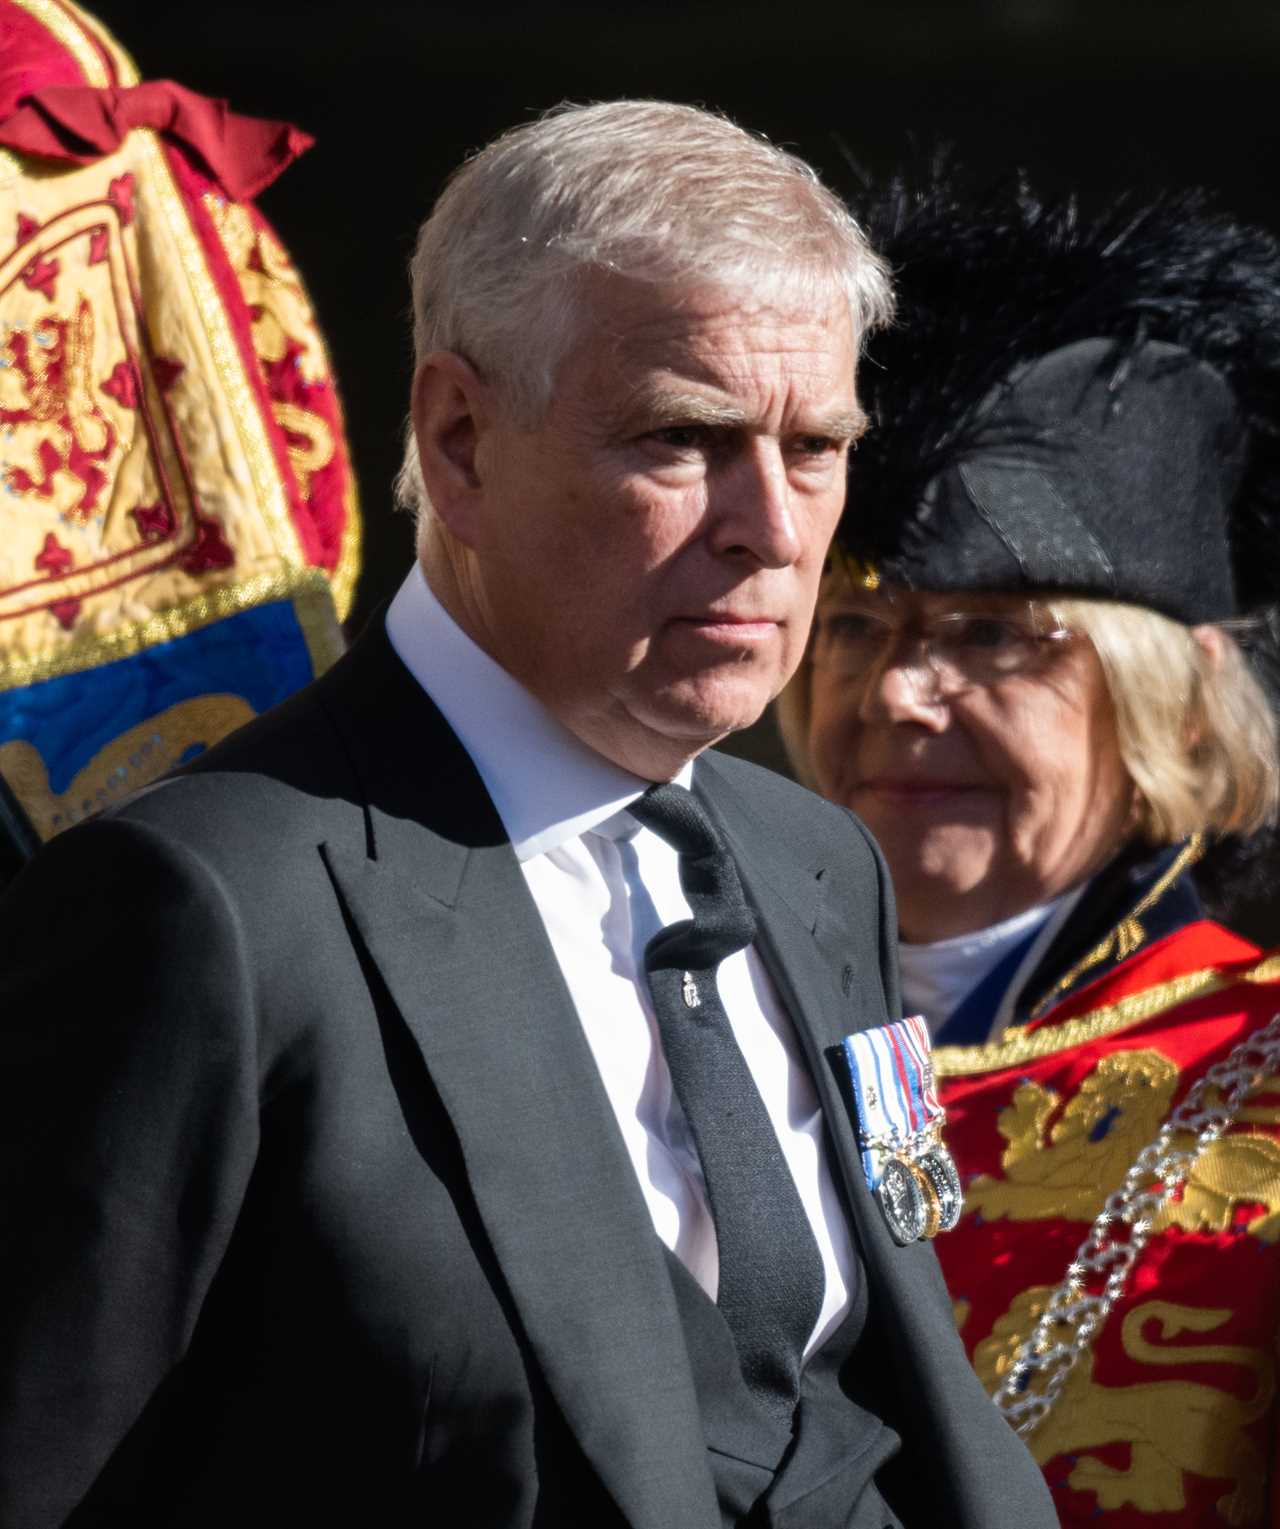 King Charles’ snub to Prince Andrew on his first birthday as monarch was ‘no coincidence at all’, says royal expert